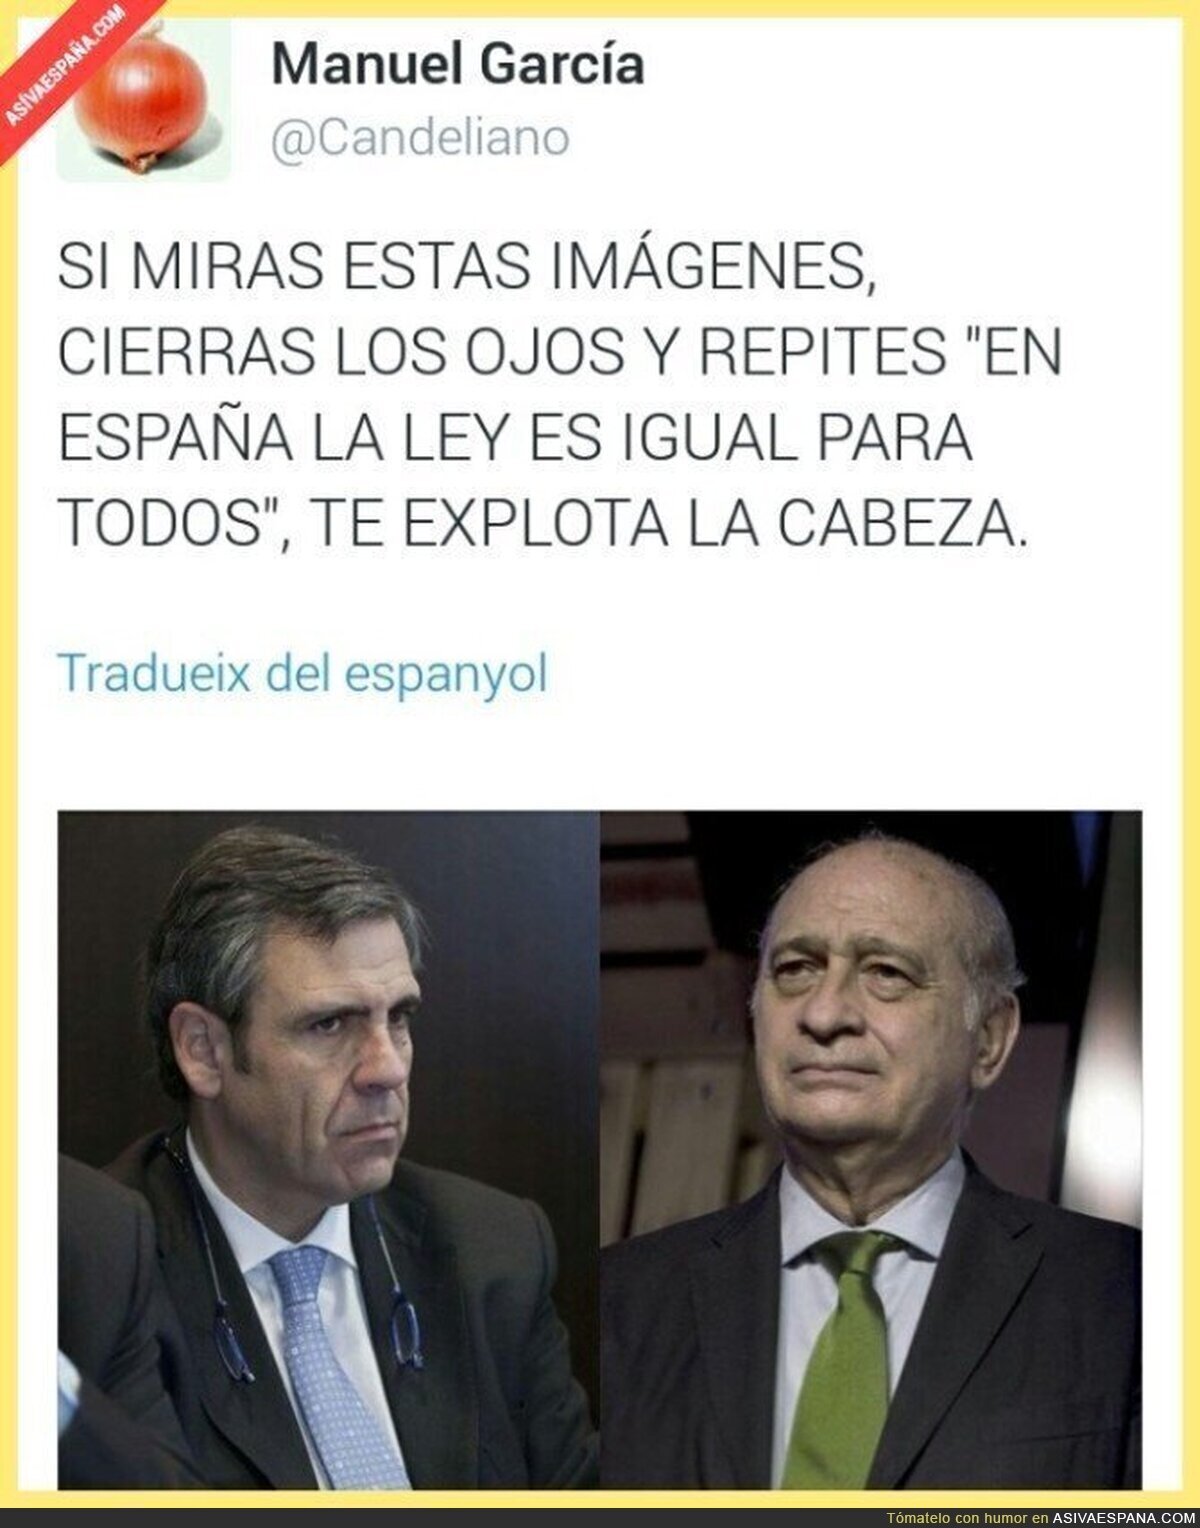 Democracy made in Spain